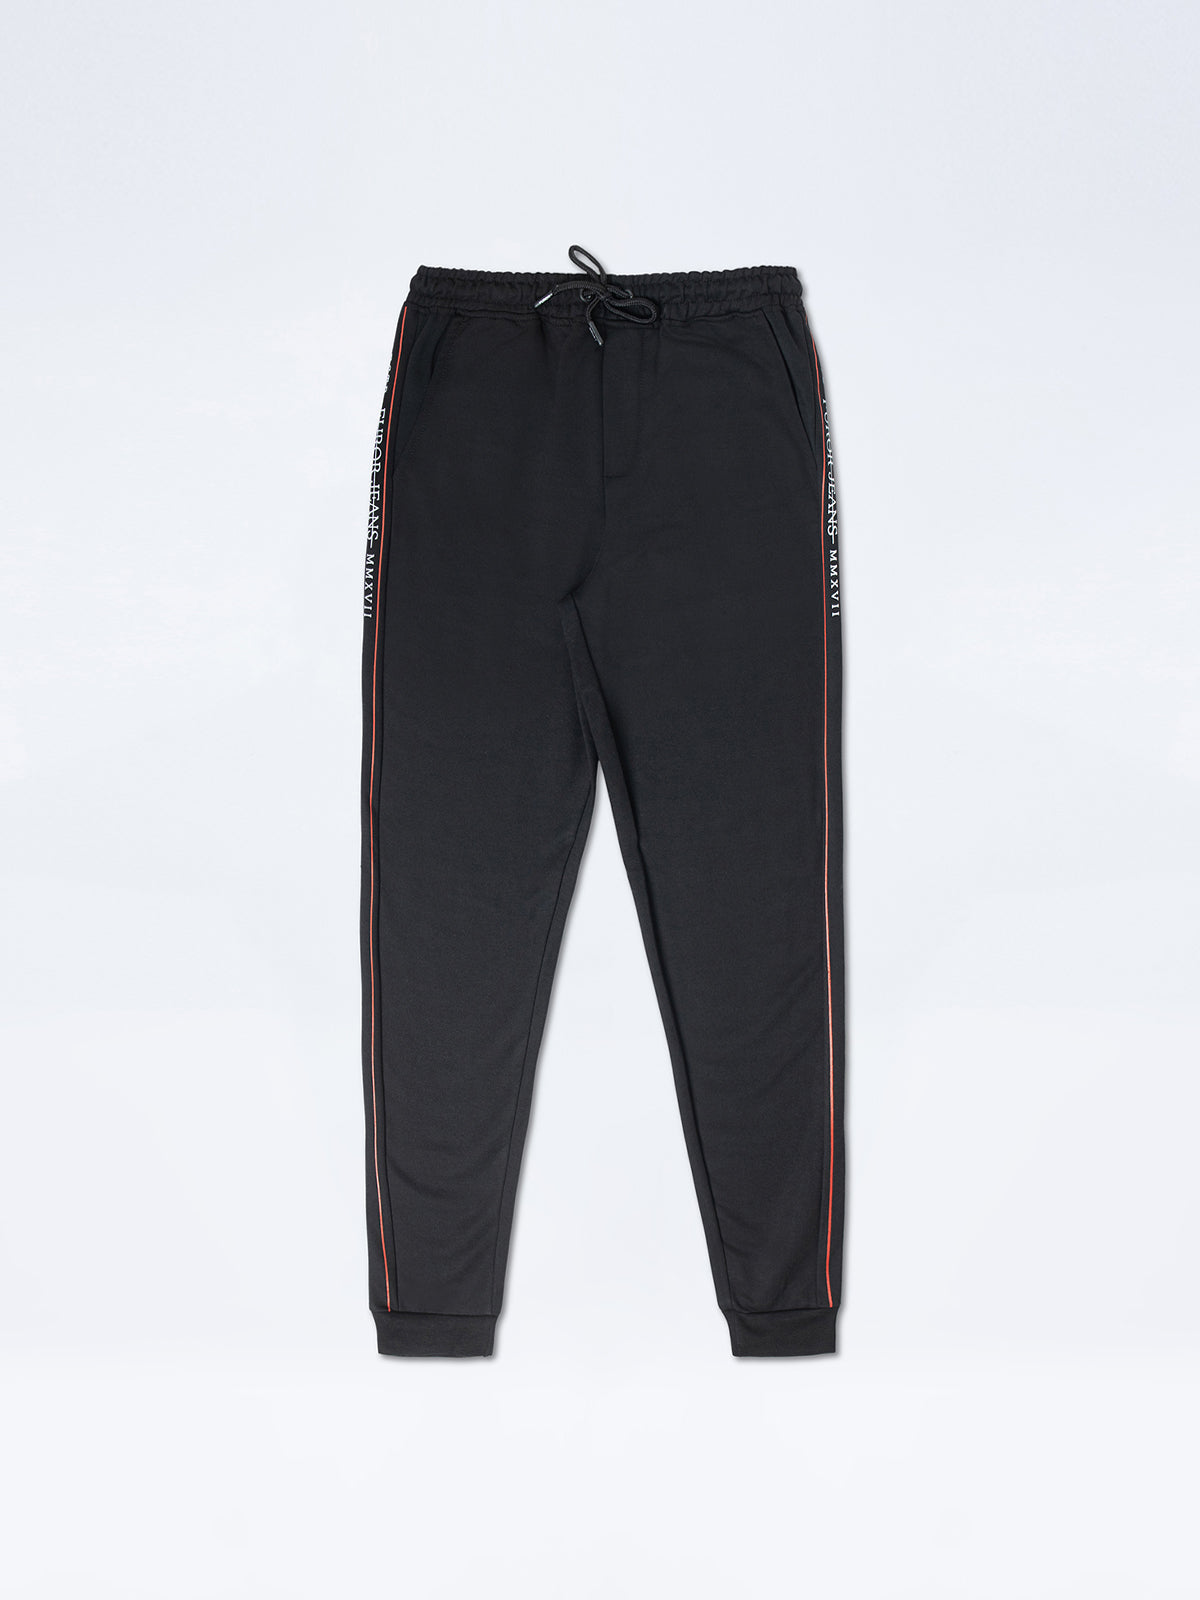 French Terry Jog Pant - FMBT24-013